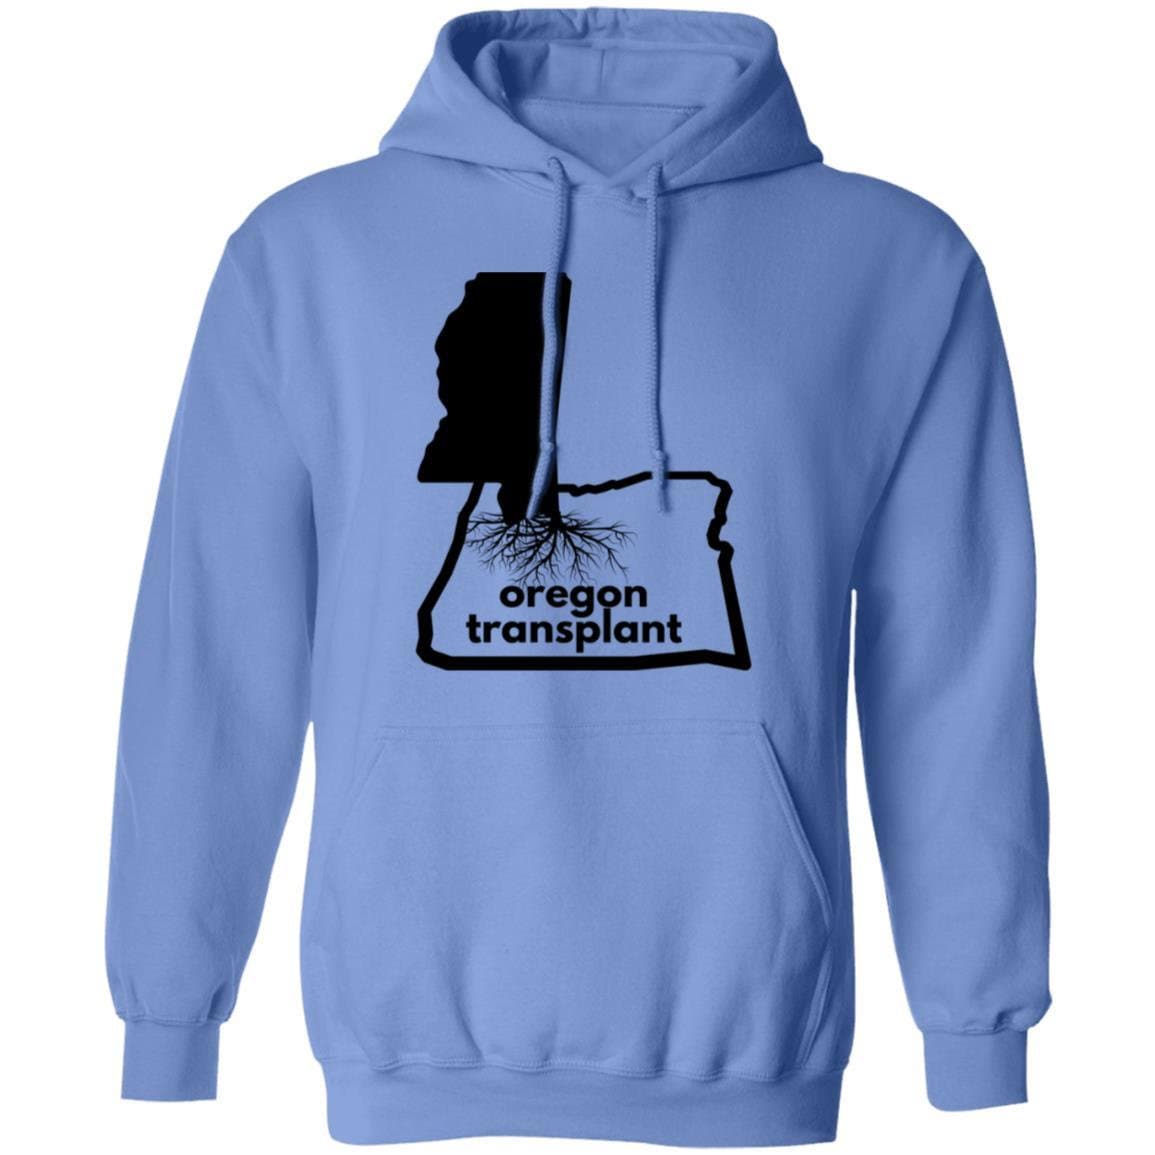 Oregon Transplant Pullover Hoodie, Customizable, for men or women, present for going away, retirement, housewarming, birthday, appreciation